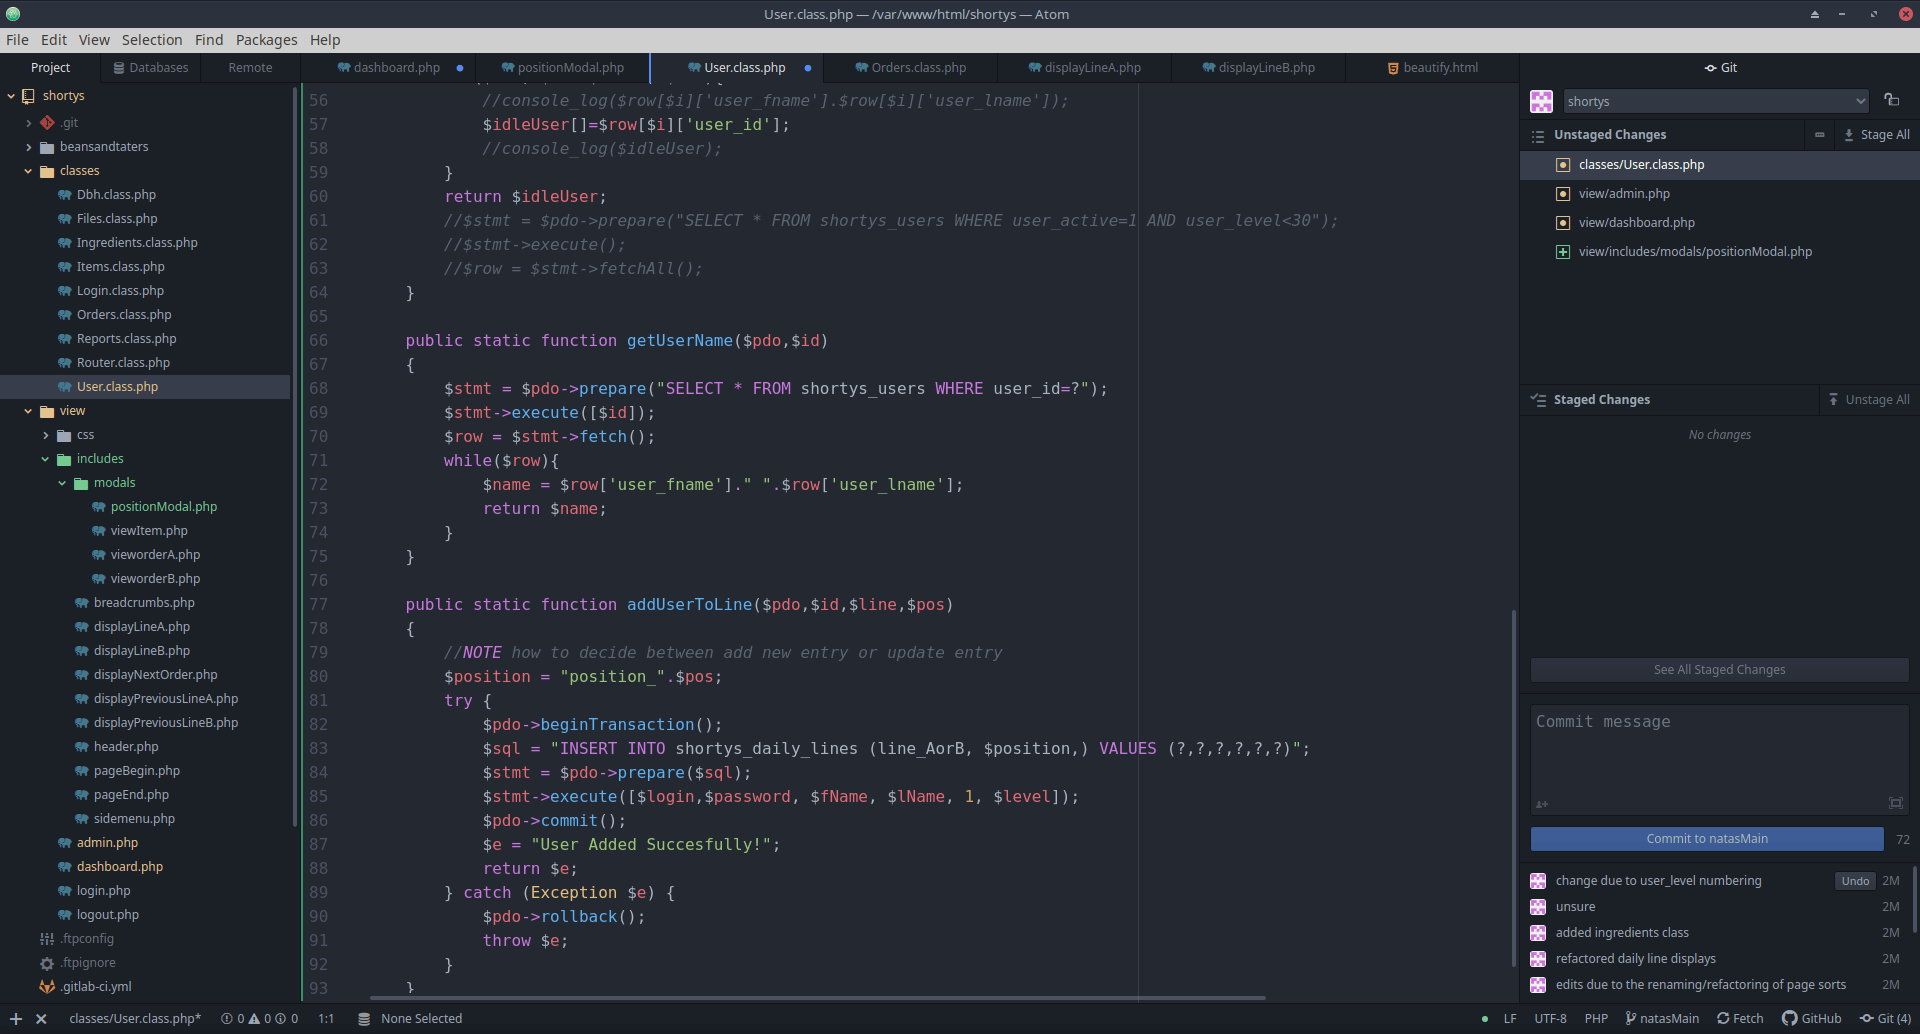 screenshot of PHP project in Atom